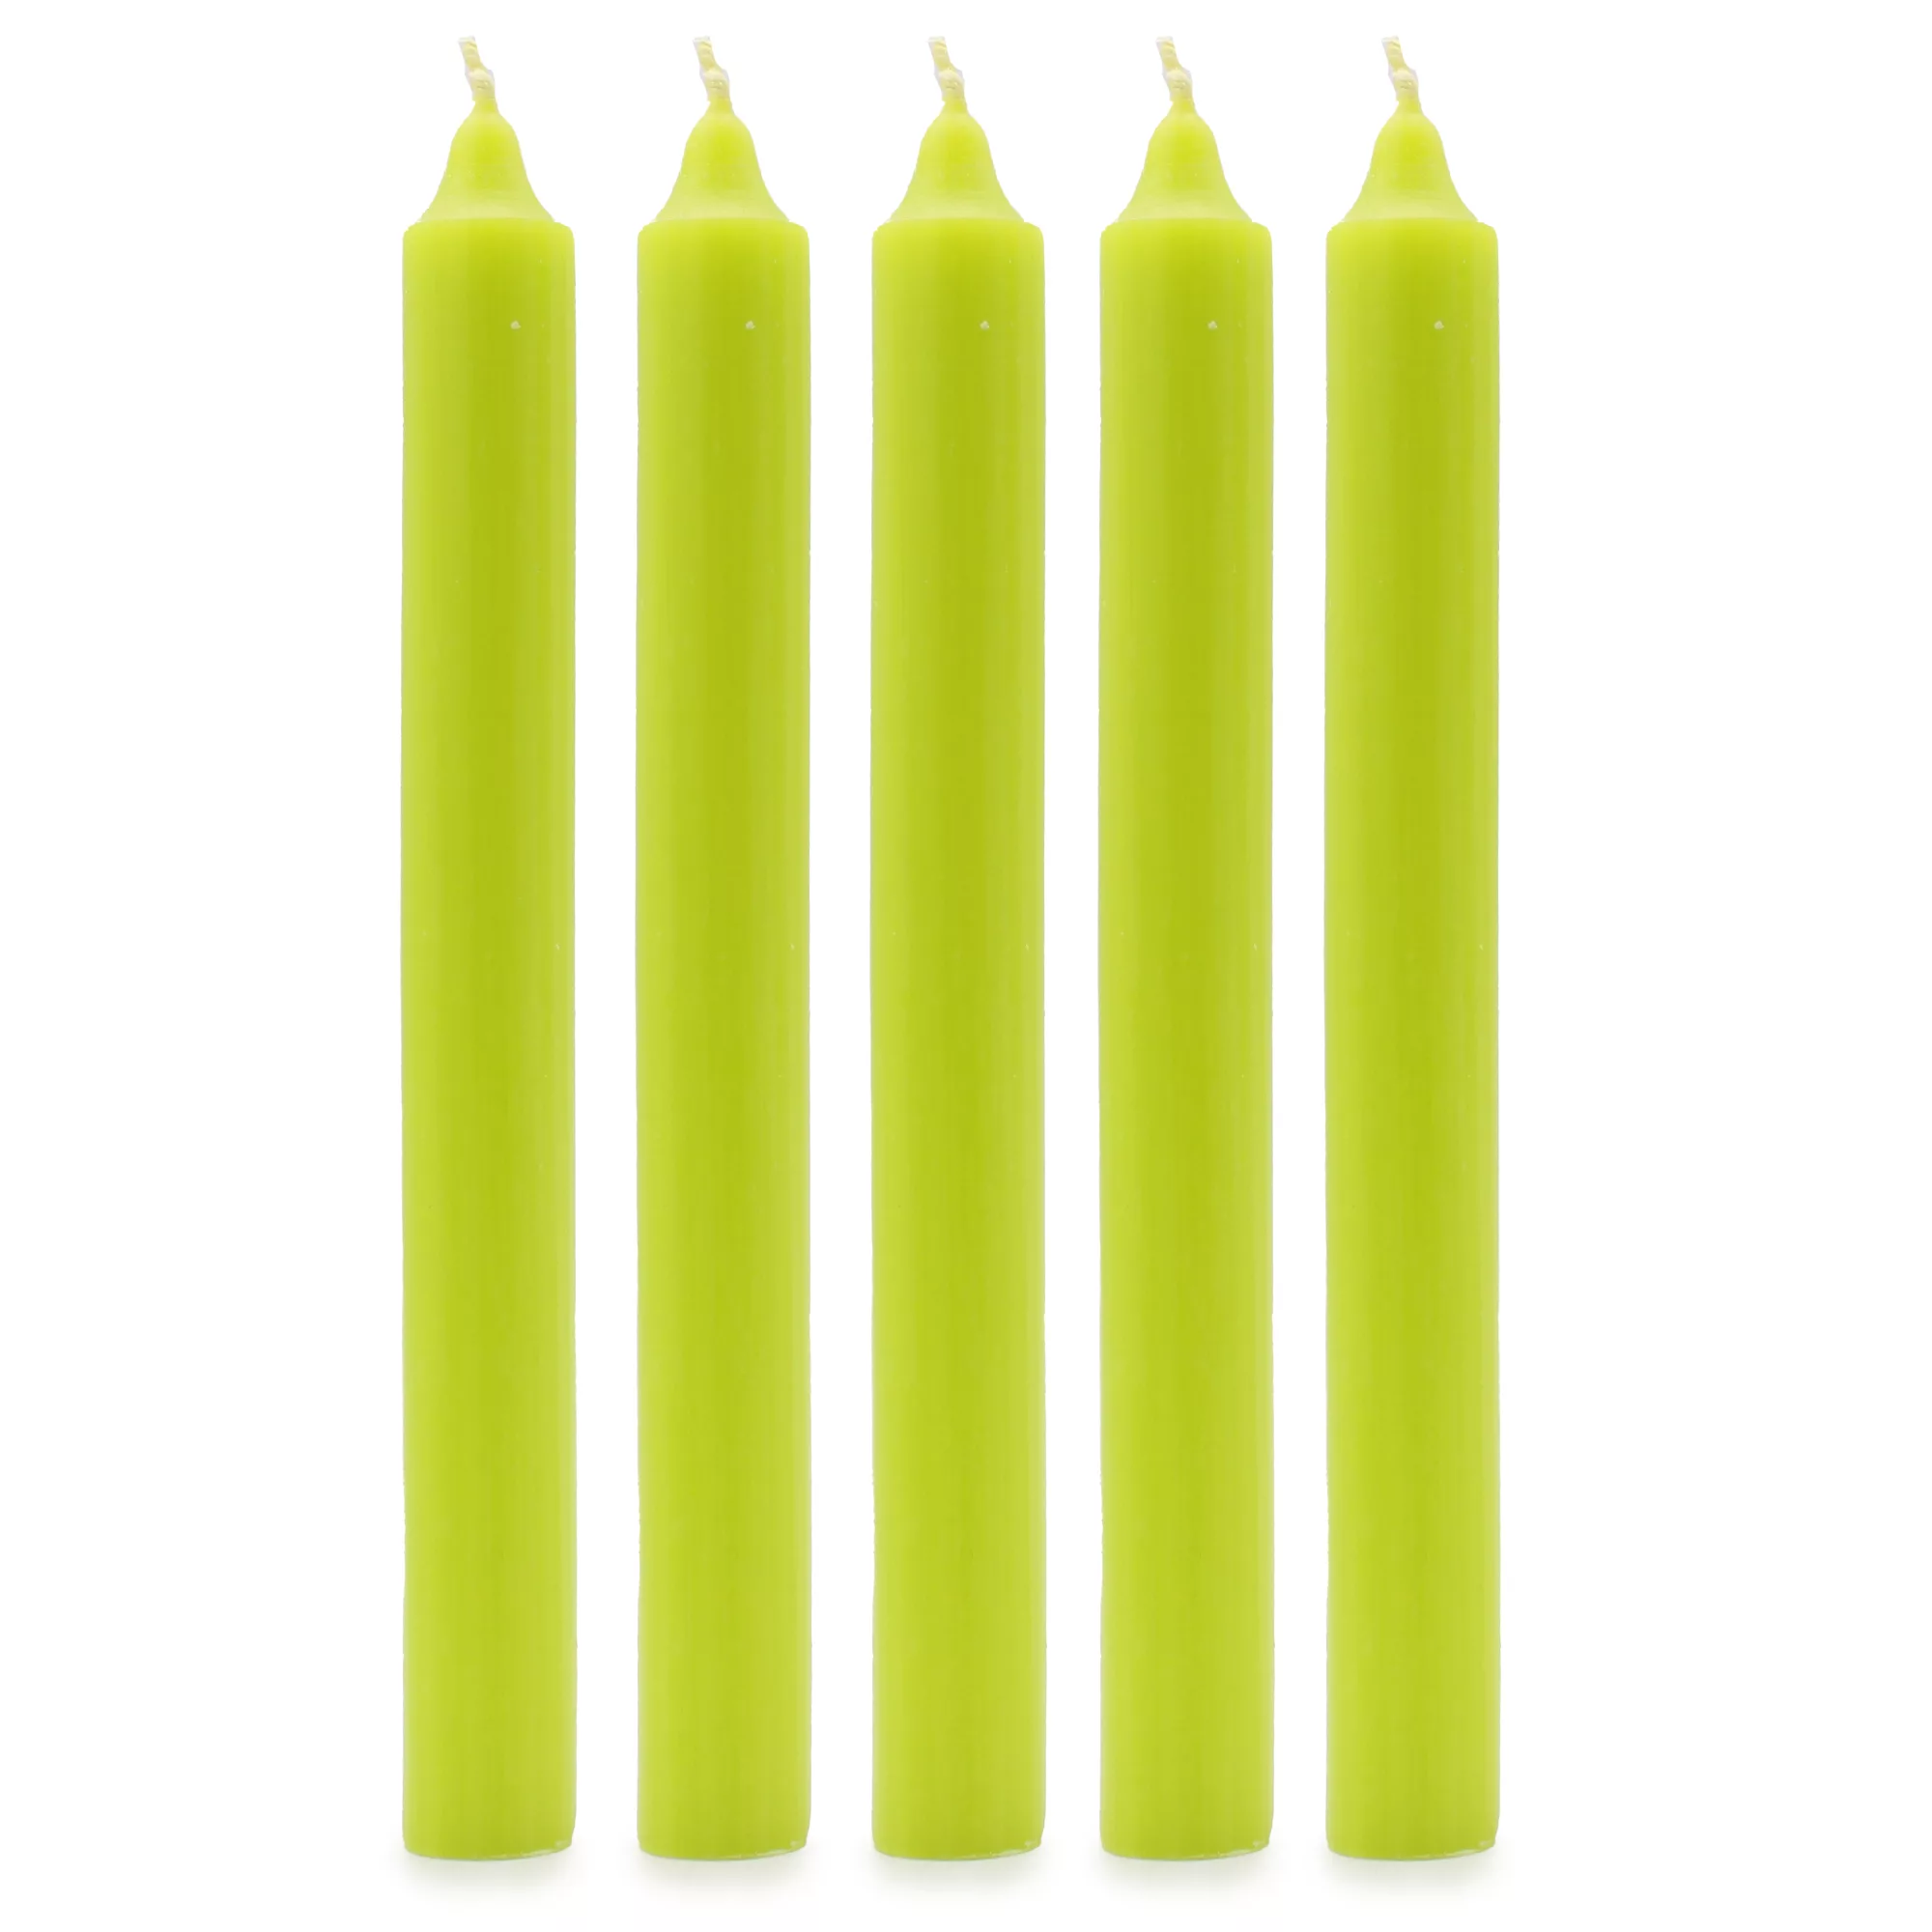 Solid Colour Dinner Candles – Rustic Lime Green – Pack of 5